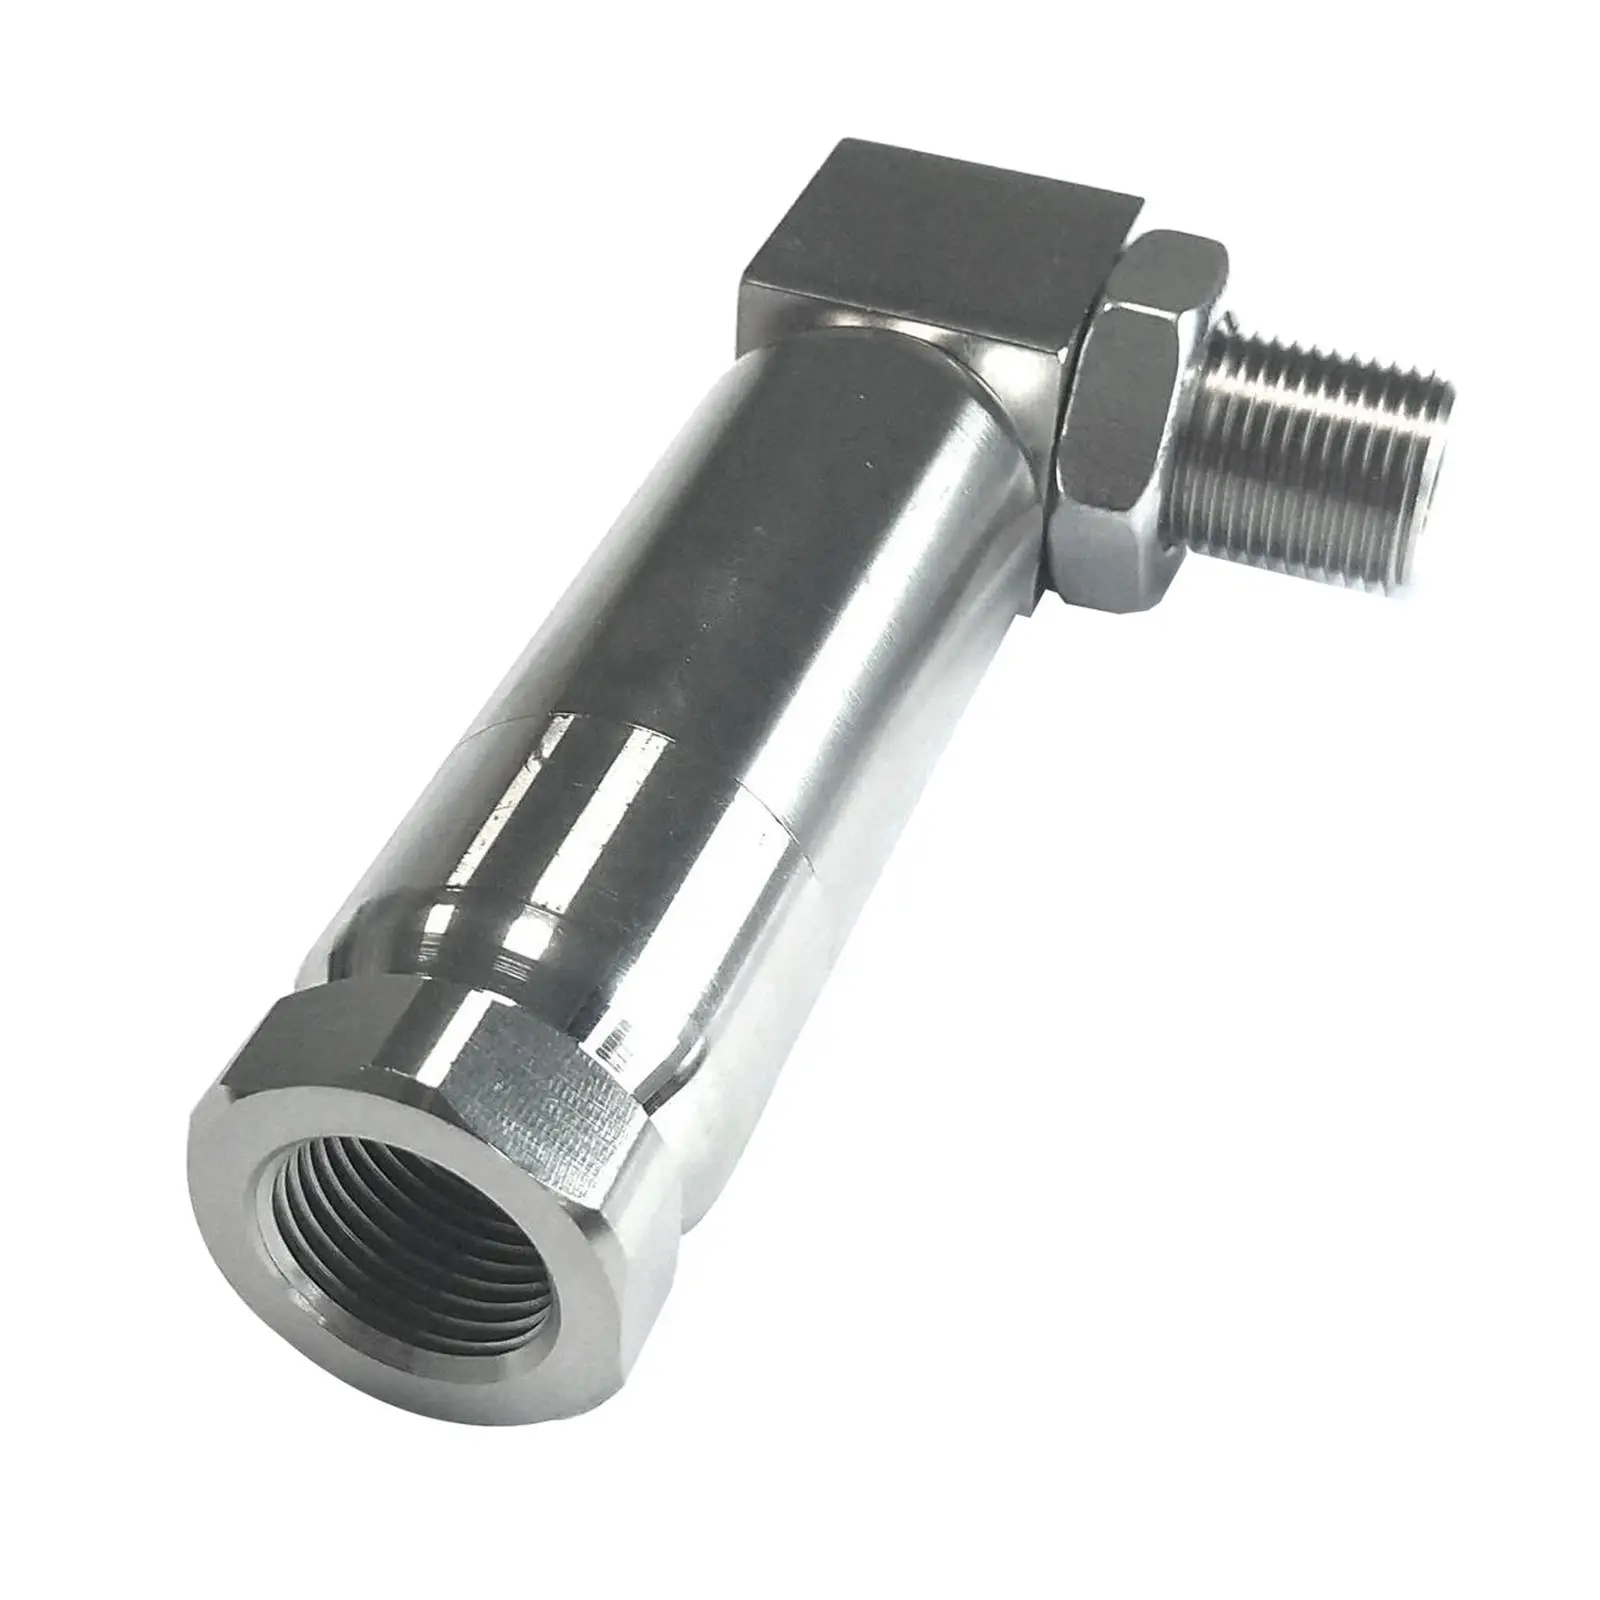 Stainless Steel O2  Angled Extender Spacer M18 x1.5,Universal for Any Thread Size of 18mm